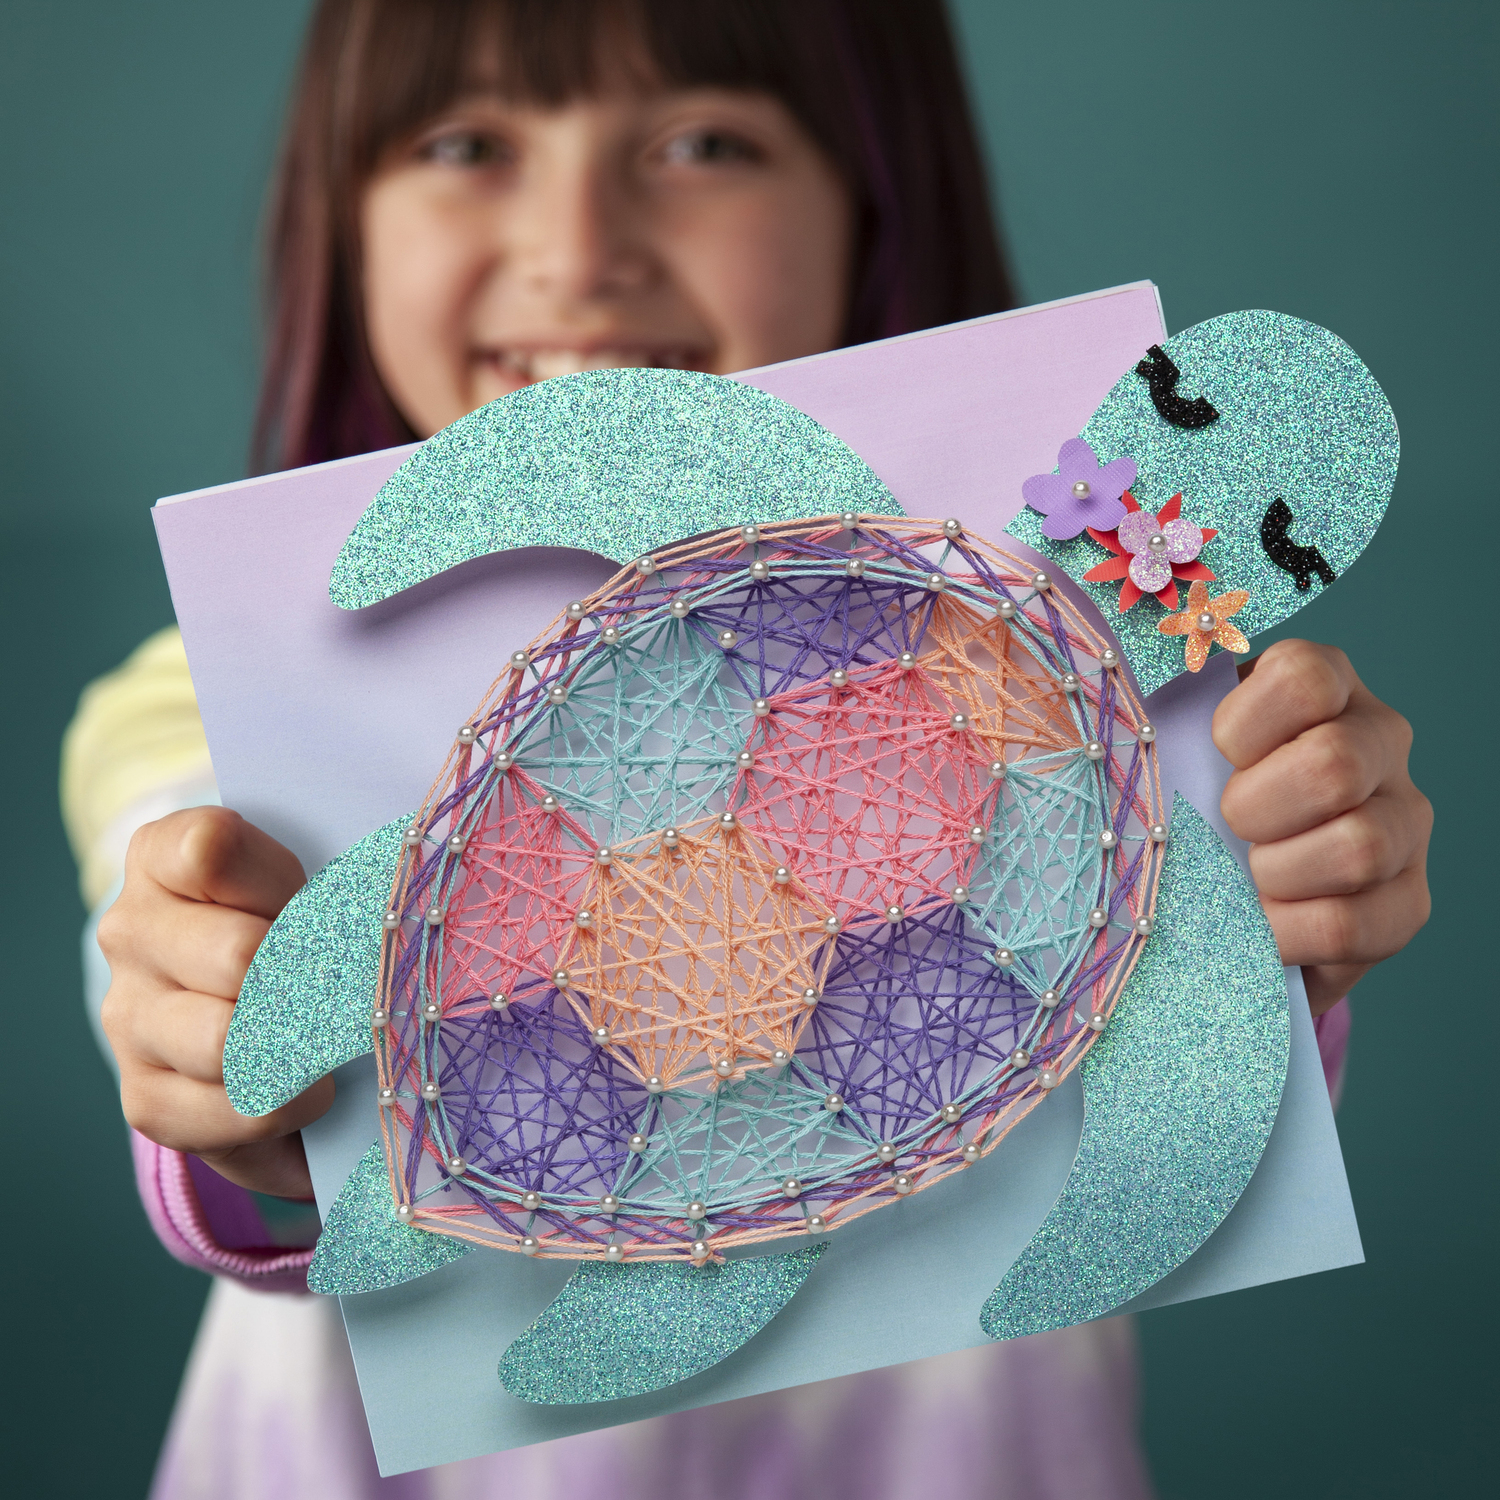 Craft-tastic DIY String Art - Craft Kit for Kids - Everything Included for  2 Fun Arts & Crafts Projects - Features a Sparkly Sea Turtle & Hibiscus  Flower Patterns 